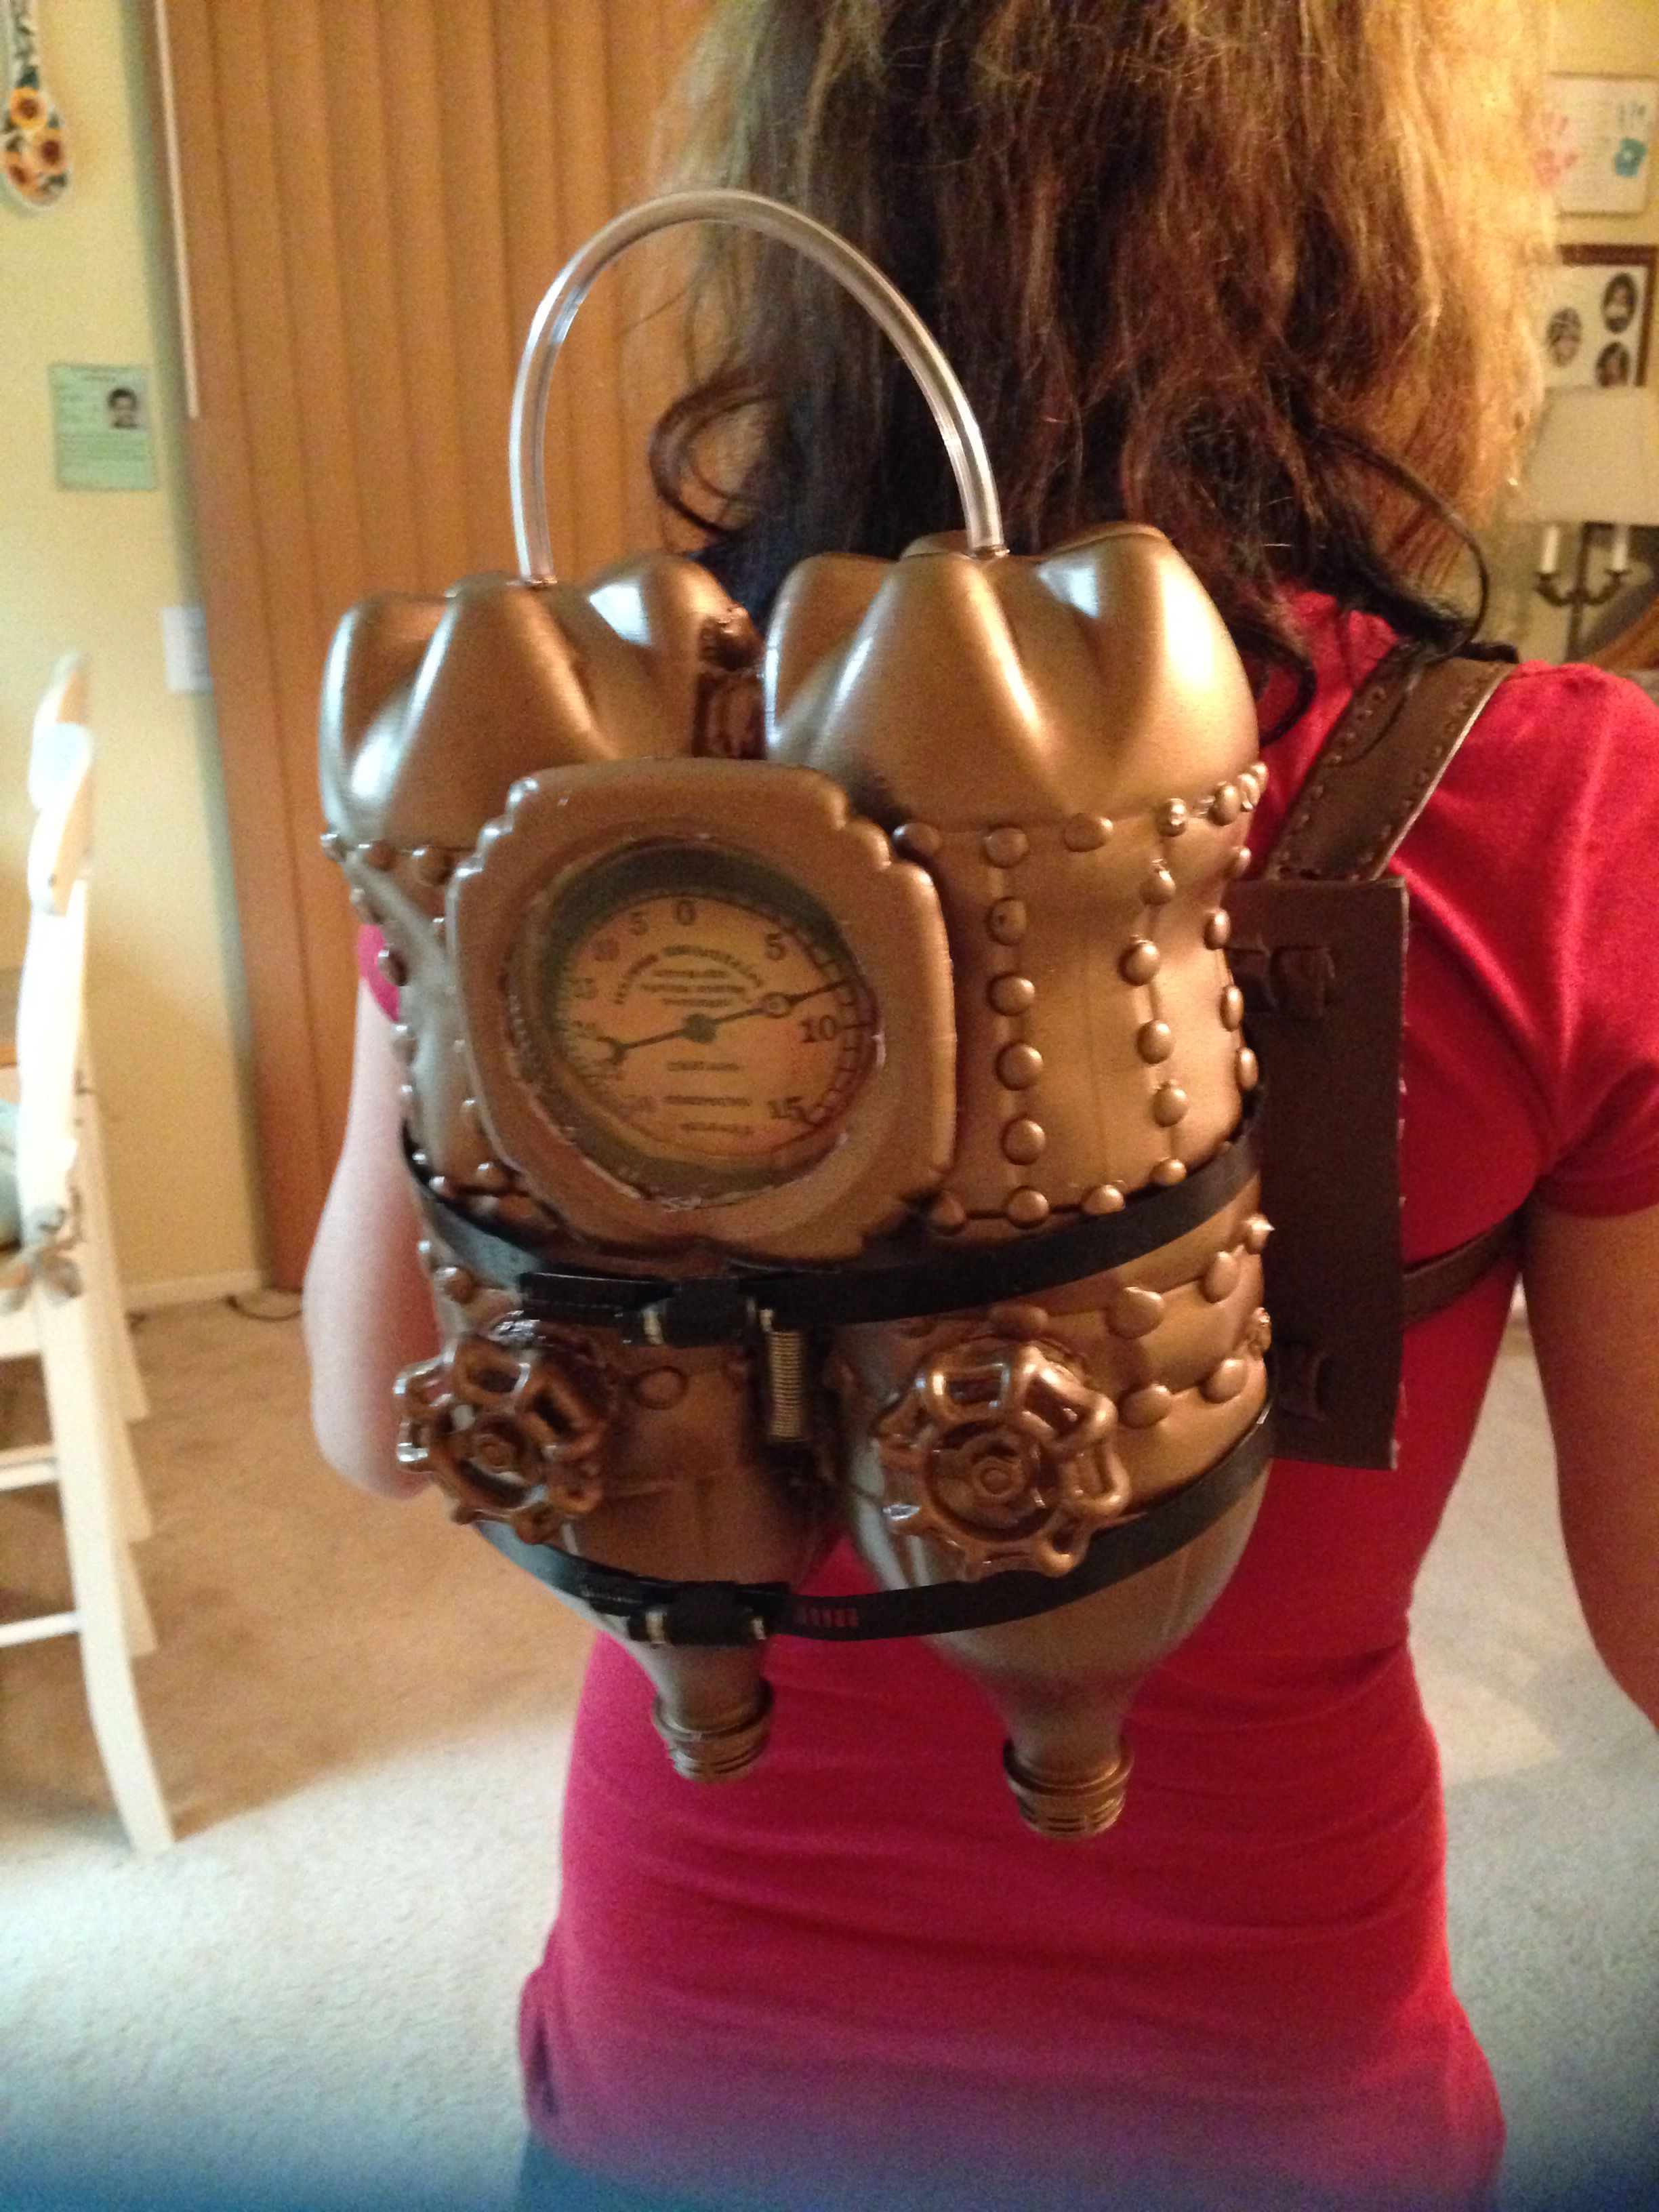 Here is my Jet pack that I made for my Lady Steampunk Time Traveler Costume. :D